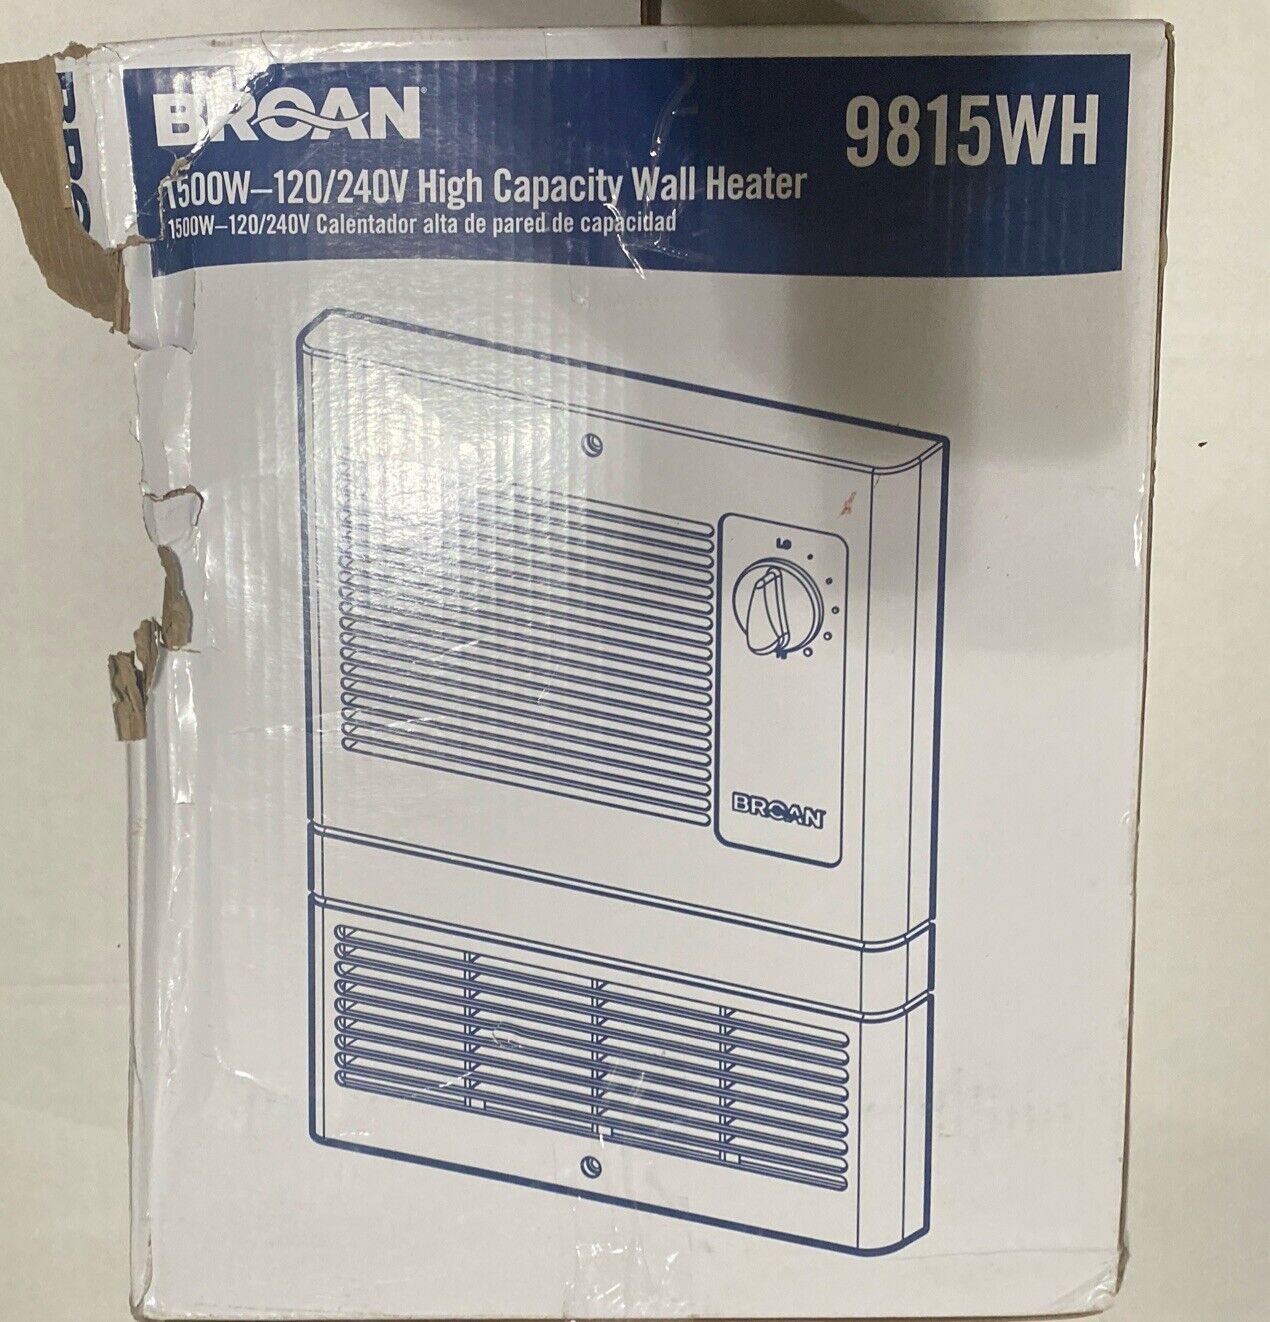 Broan 9815WH 1500W 120V/240V High Capacity Fan-Forced Wall Heater New/Open